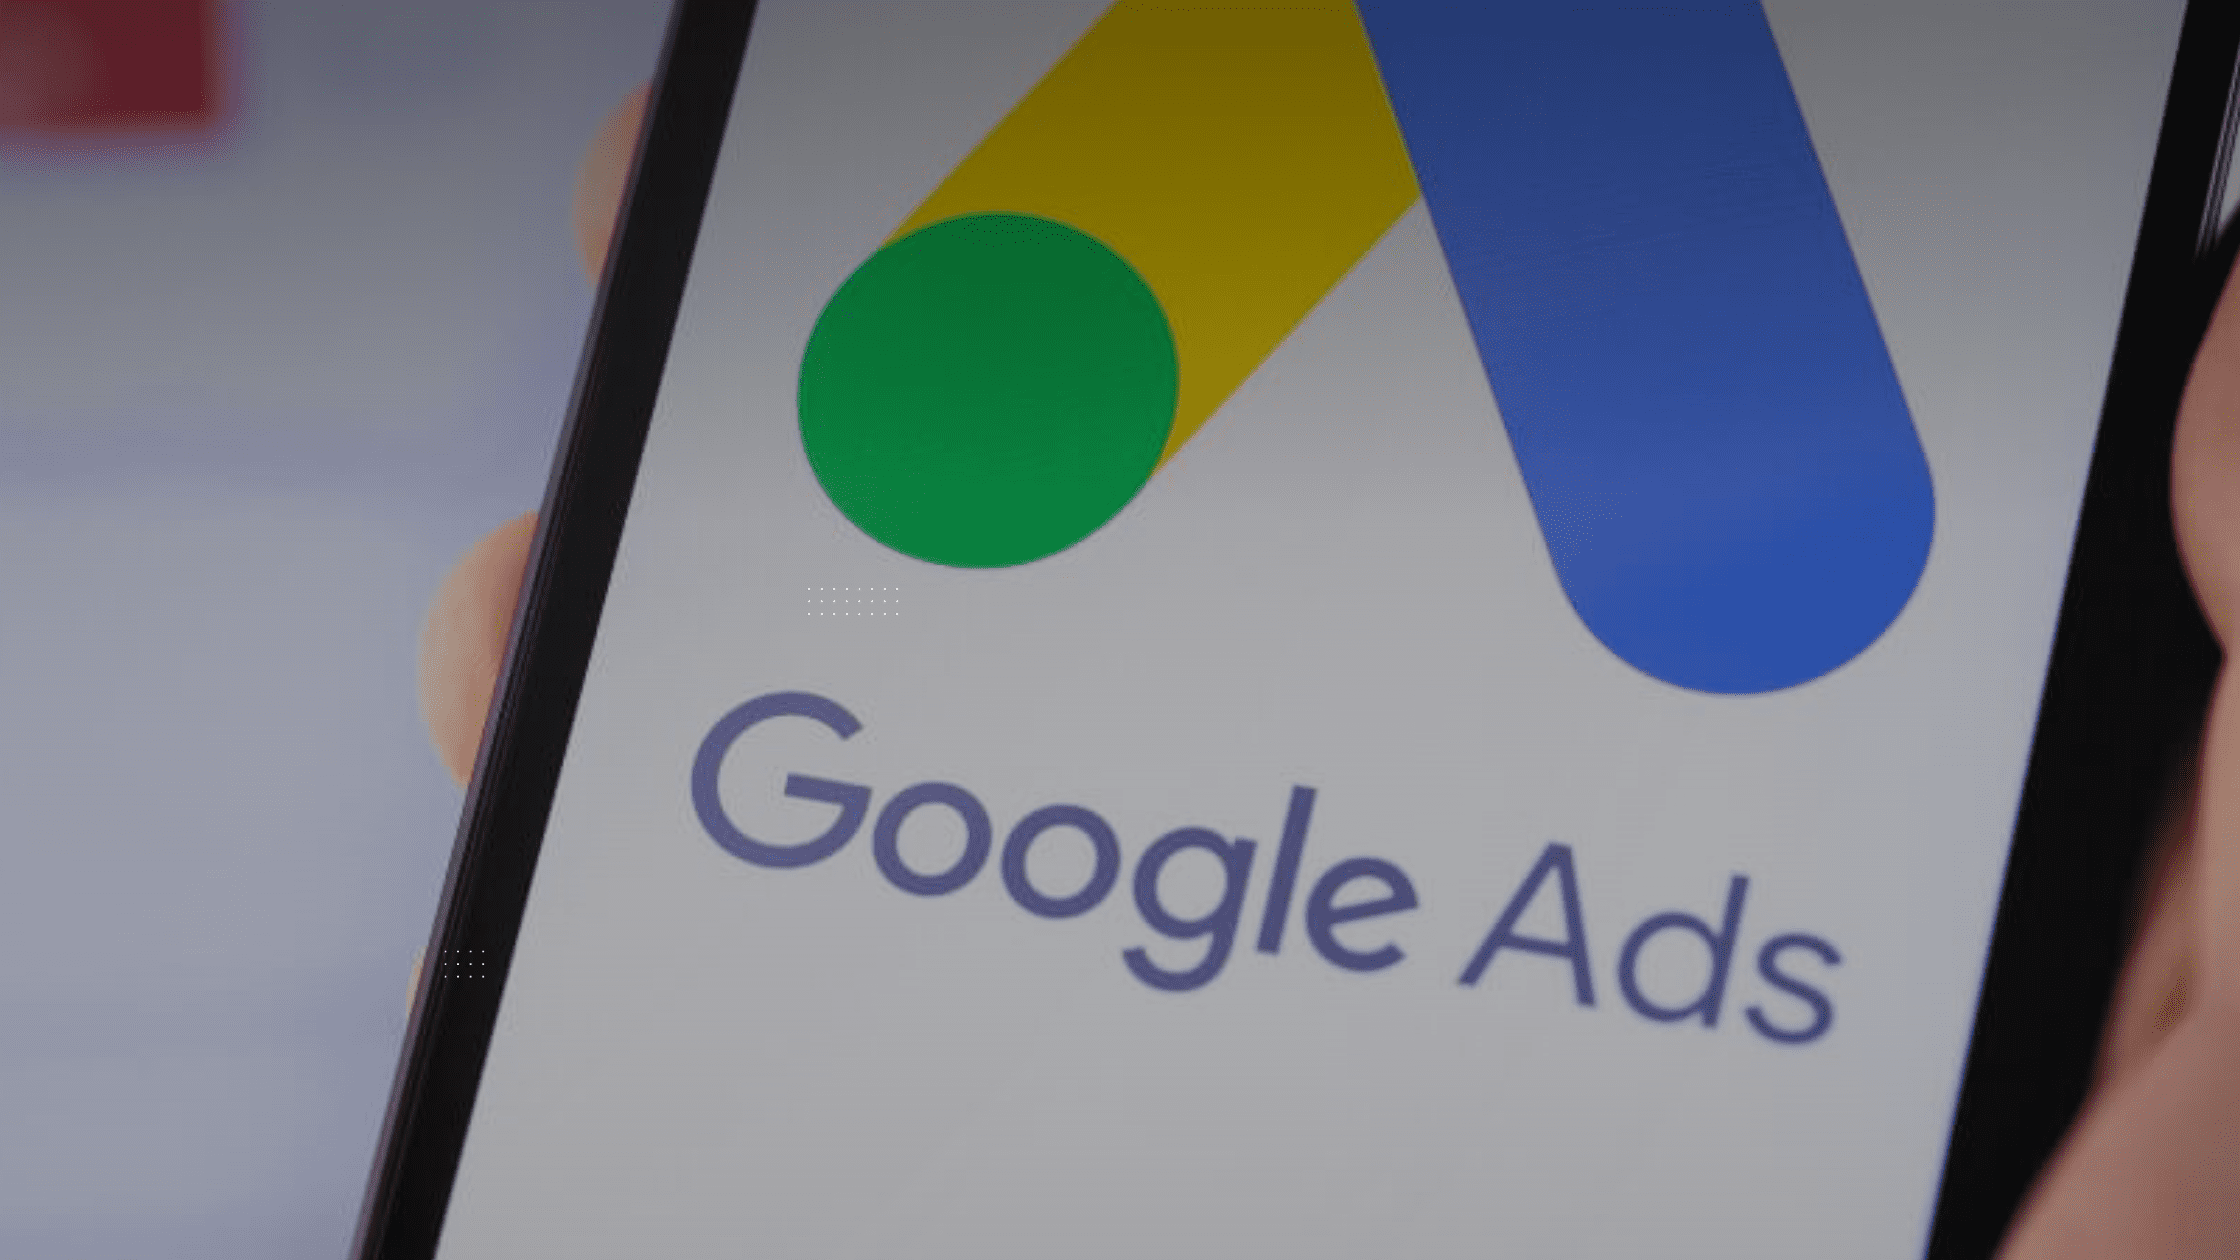 Stay Ahead of Google Ads Policy Changes with Our Expert Management